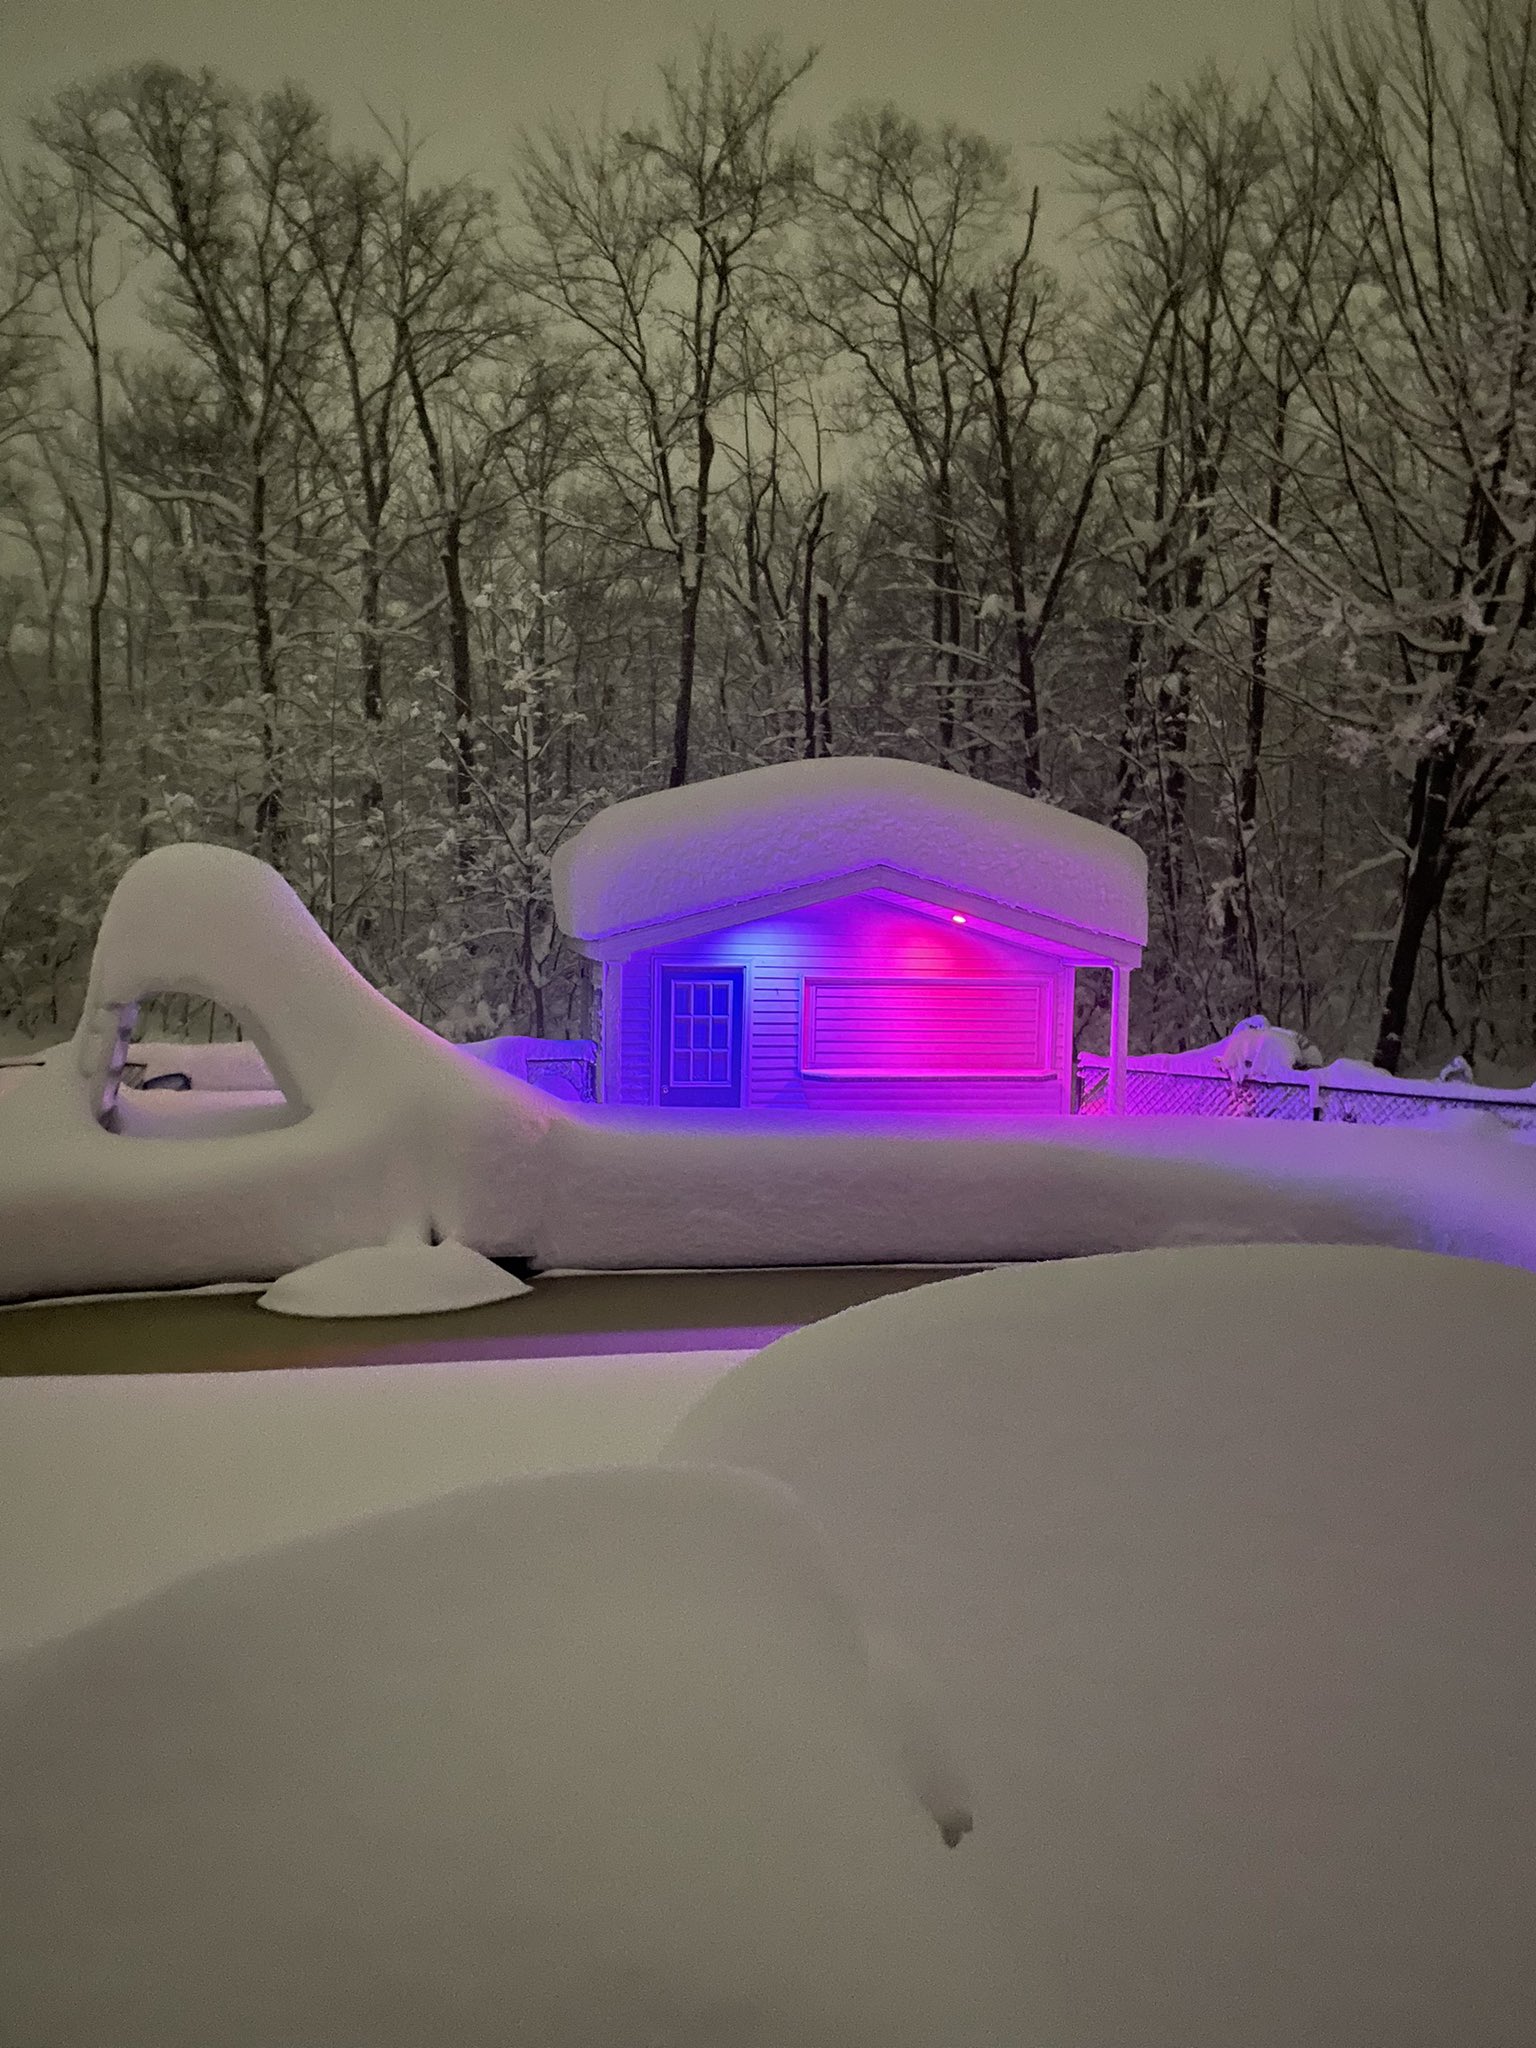 pool house lit up with Buffalo Bills colors after huge snowstorm.